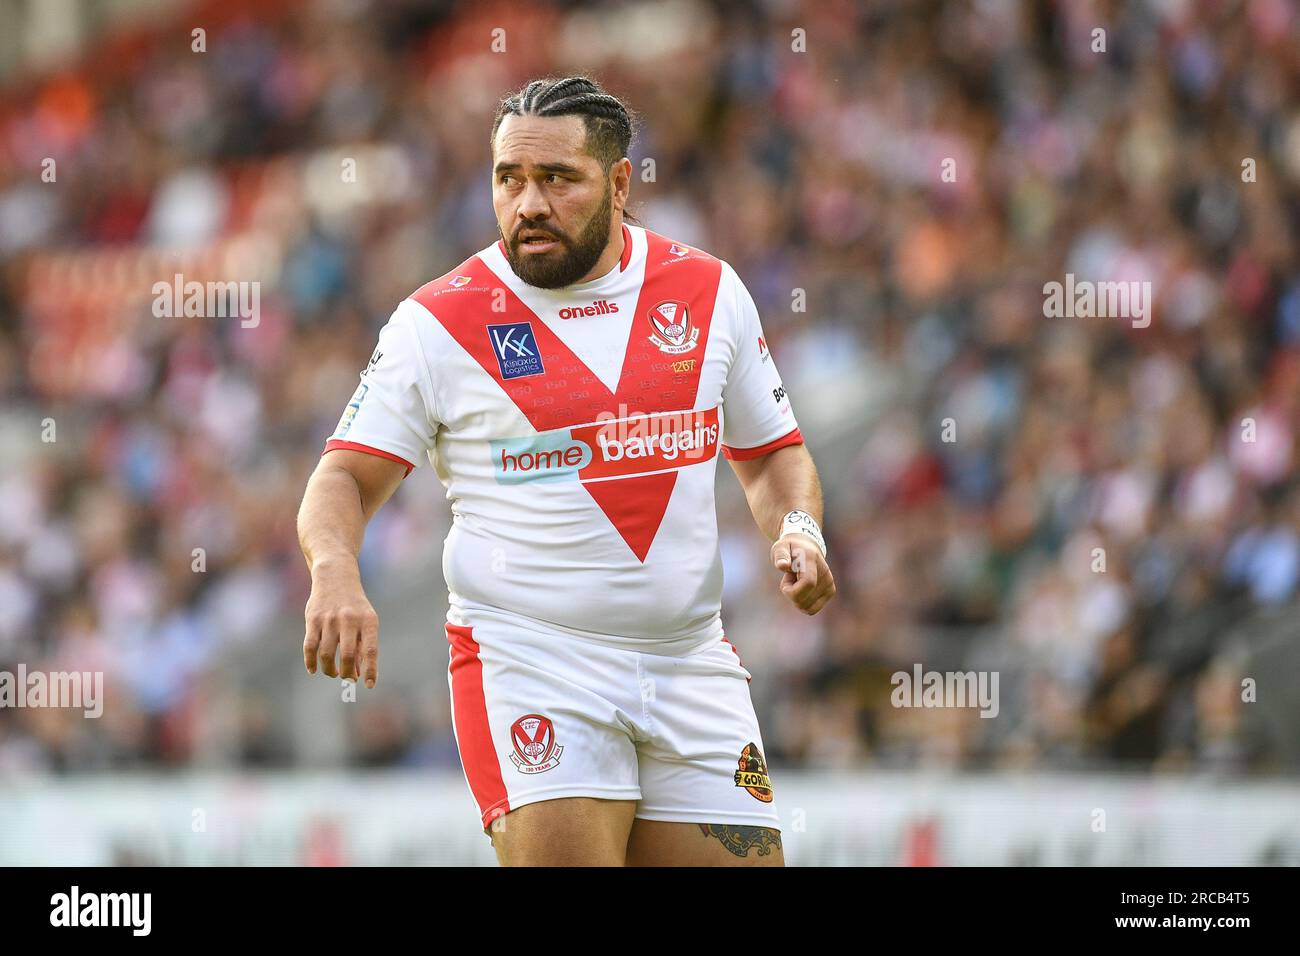 St. Helens, Angleterre - 13 juillet 2023 - Konrad Hurrell de St Helens. Betfred Super League, St. Helens vs Catalan Dragons au Totally Wicked Stadium, St. Helens, Royaume-Uni Banque D'Images